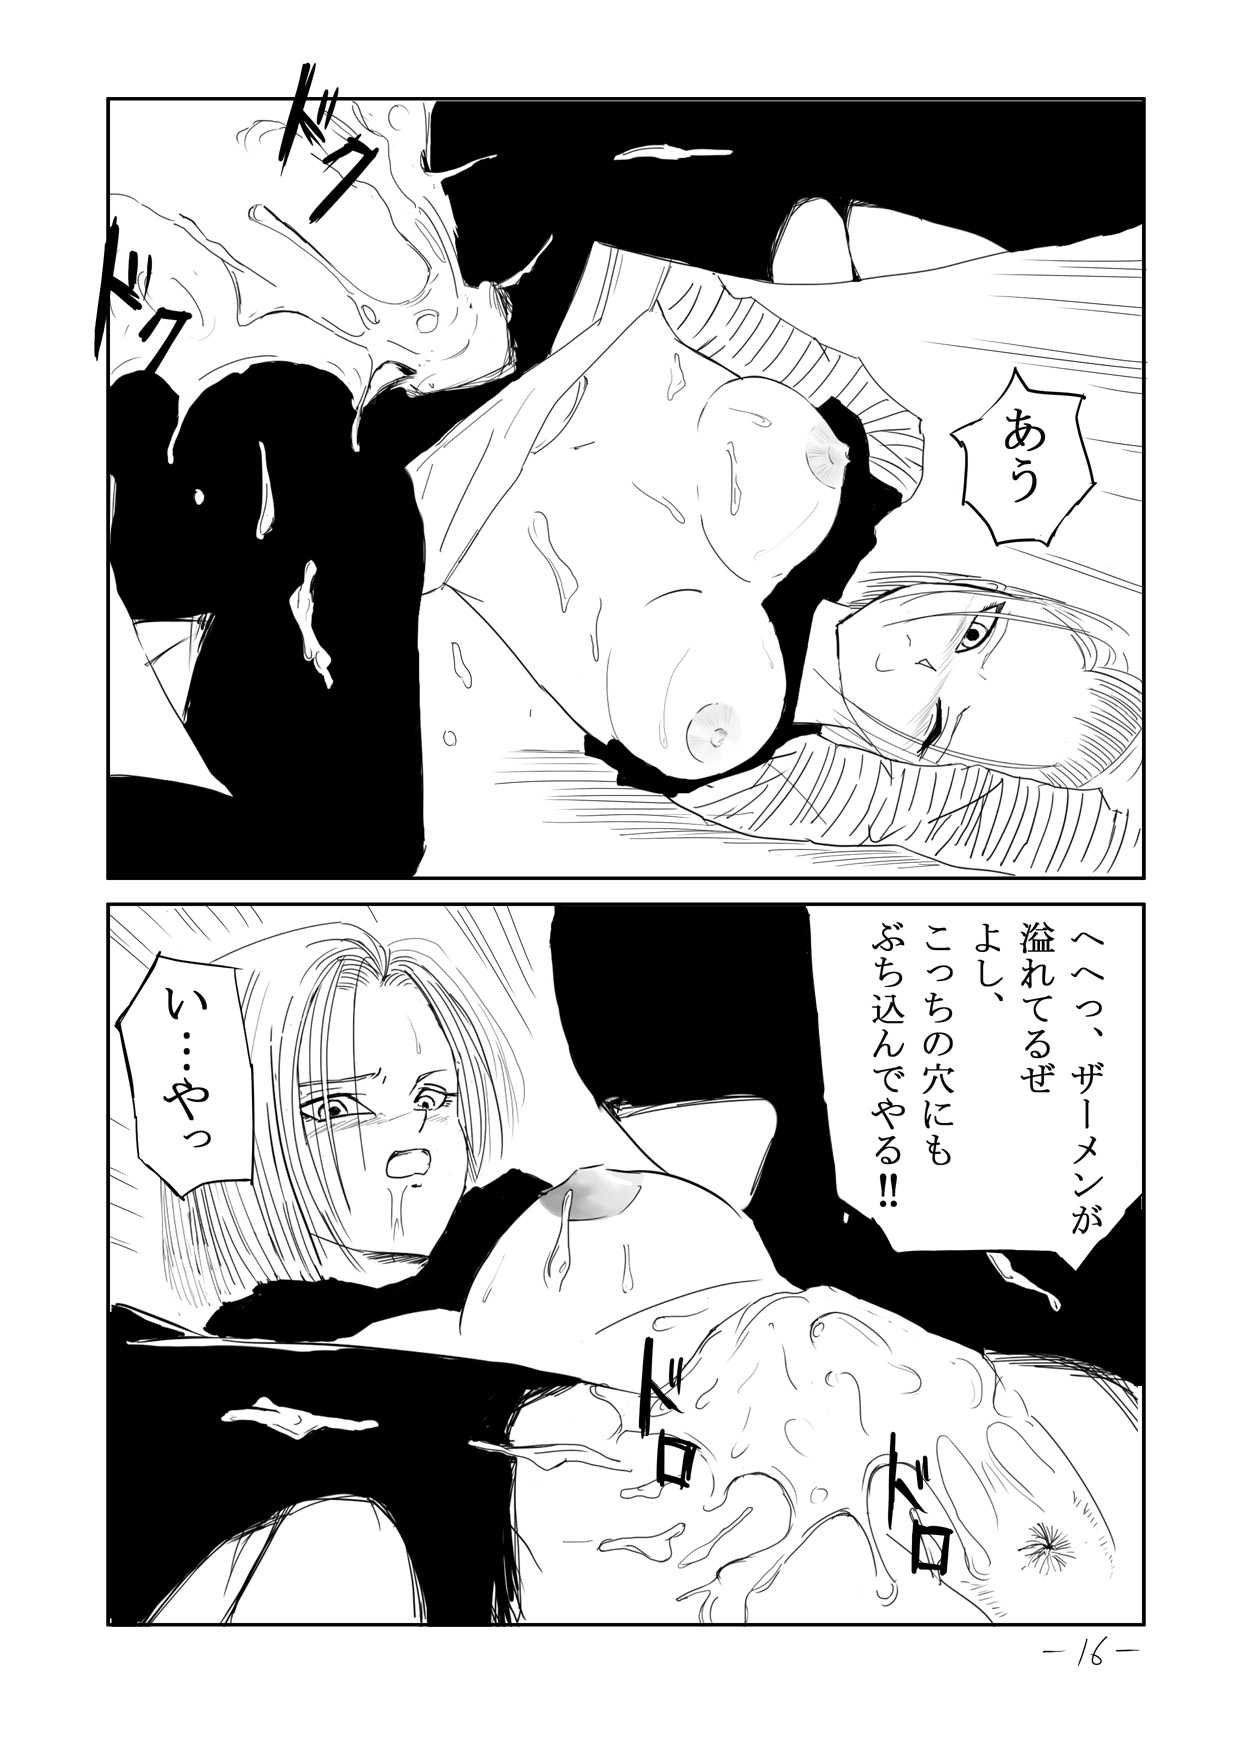 [Cat&#039;s Claw] Sexual Desire Treatment Android 18 (Dragon Ball Z) [Cat&#039;s Claw] 性処理人形 ○8号 (ドラゴンボールZ)